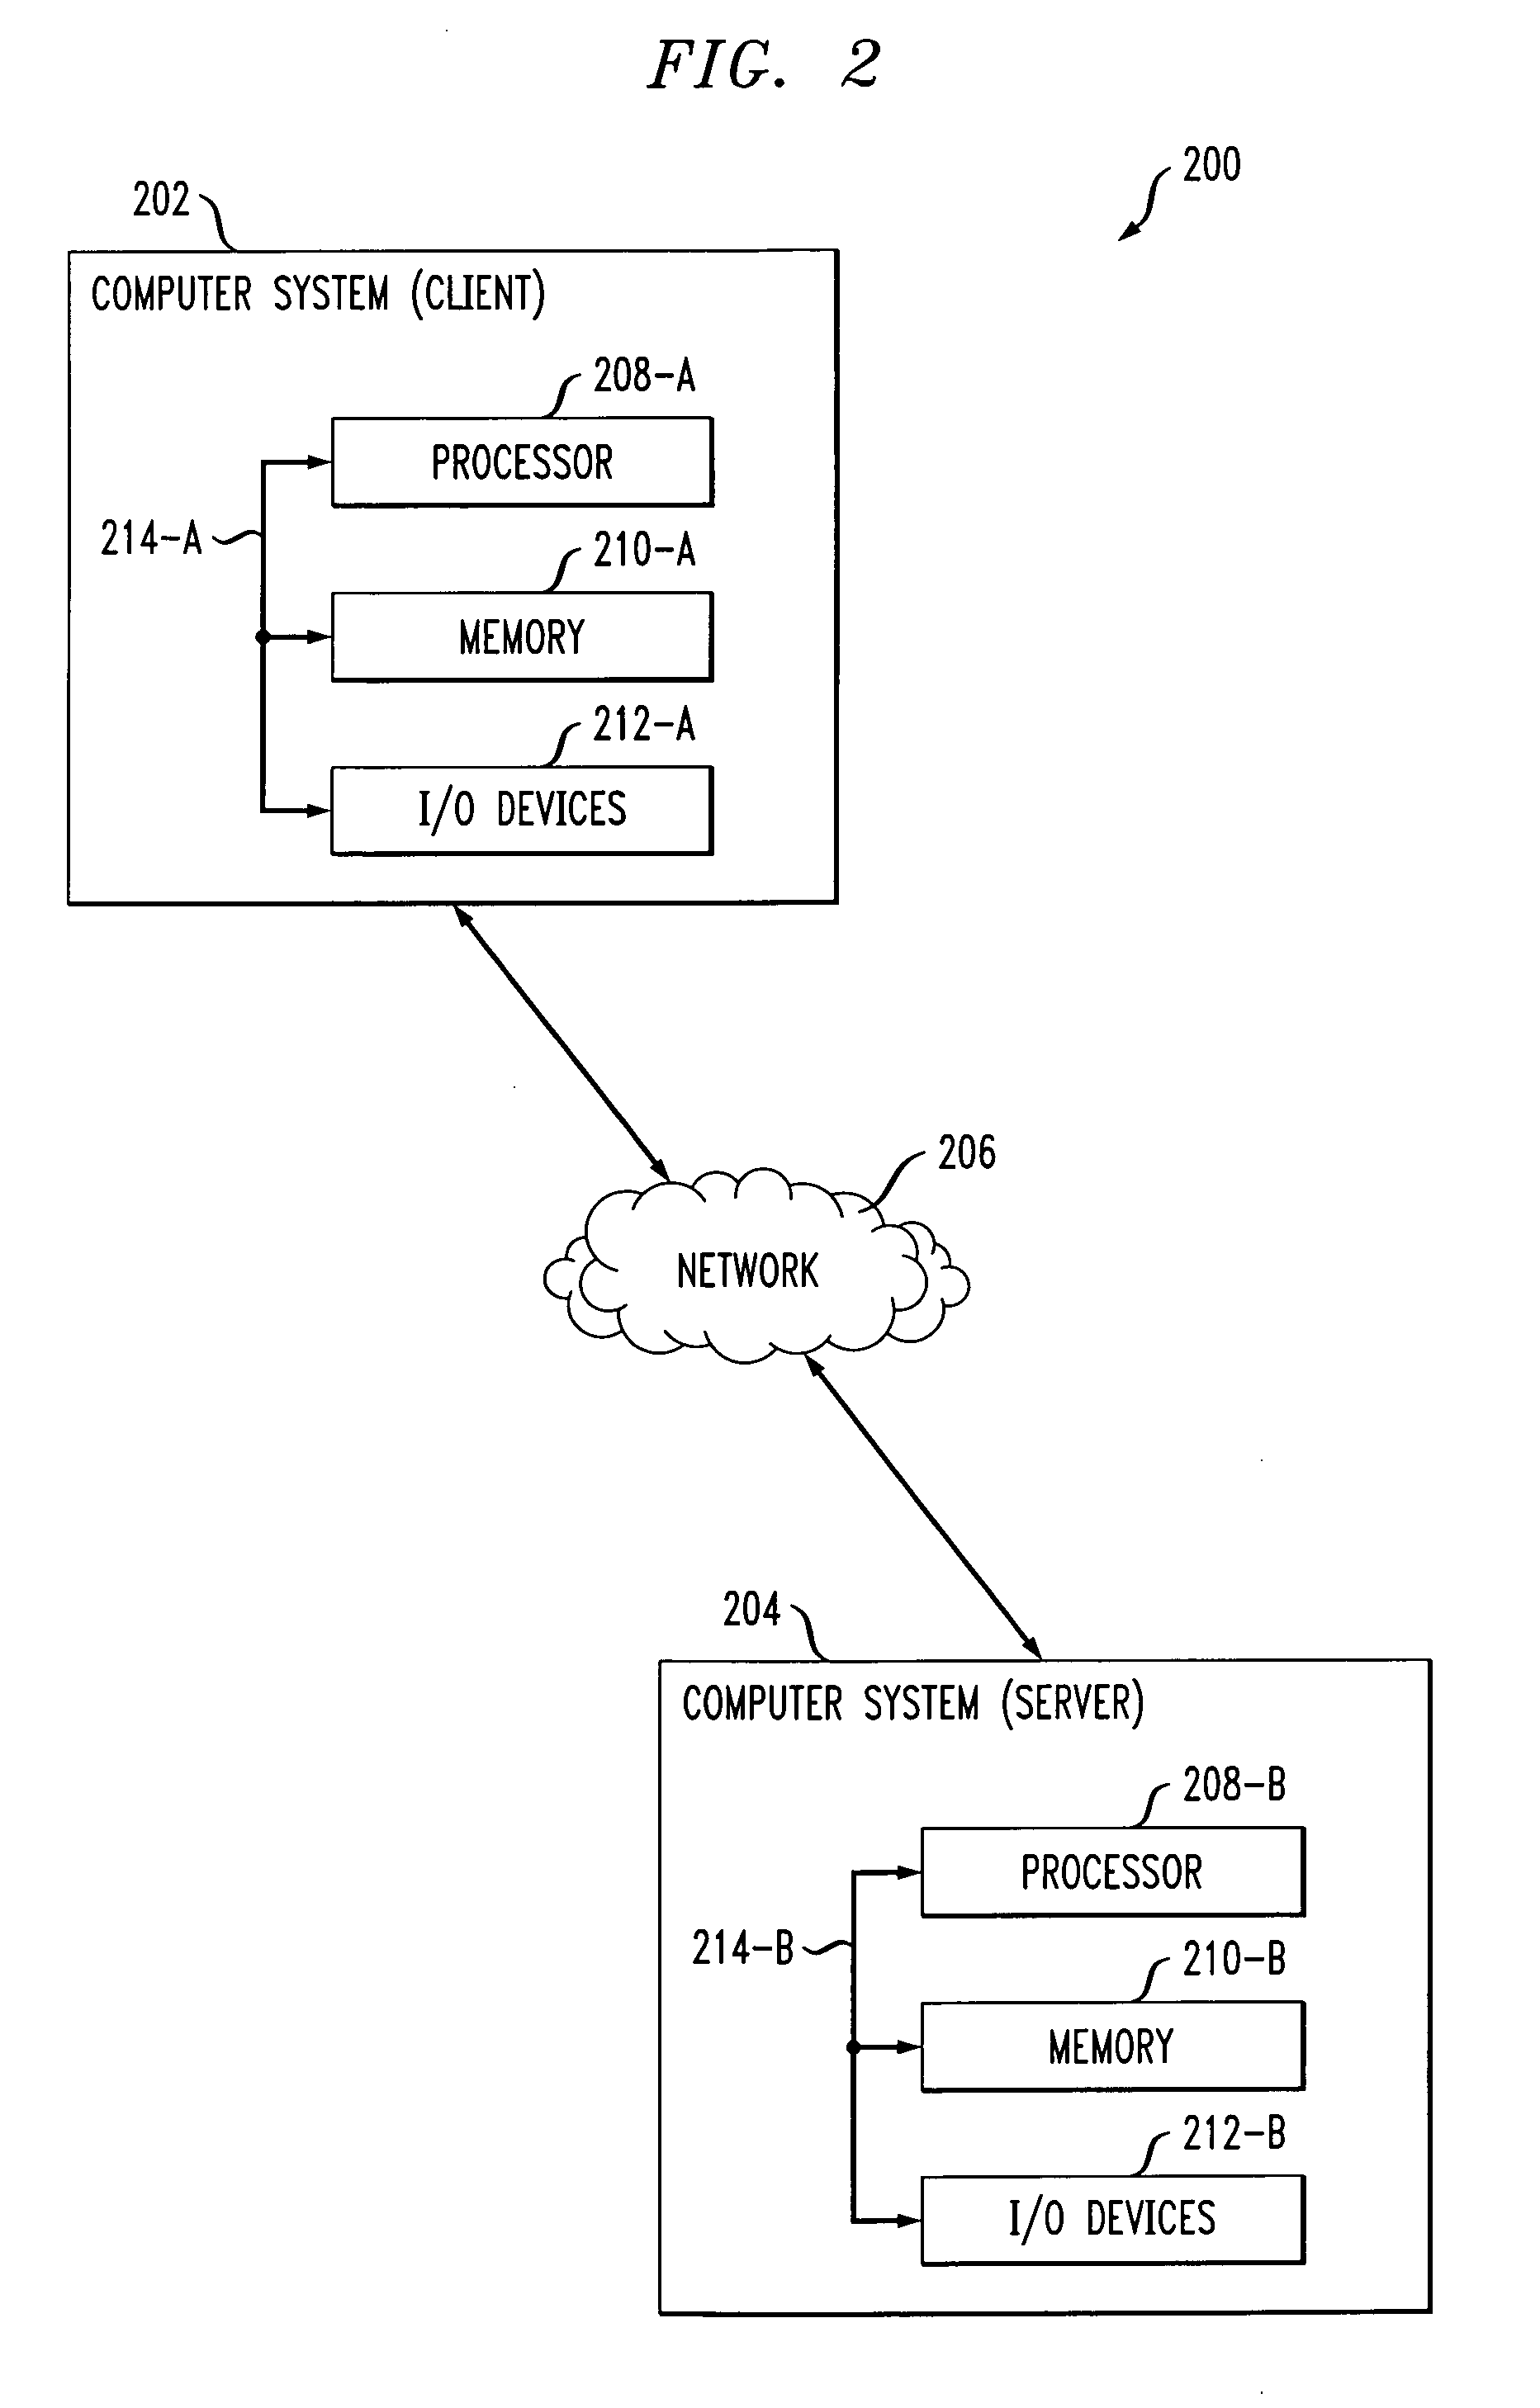 Method and apparatus for sequential authentication using one or more error rates characterizing each security challenge